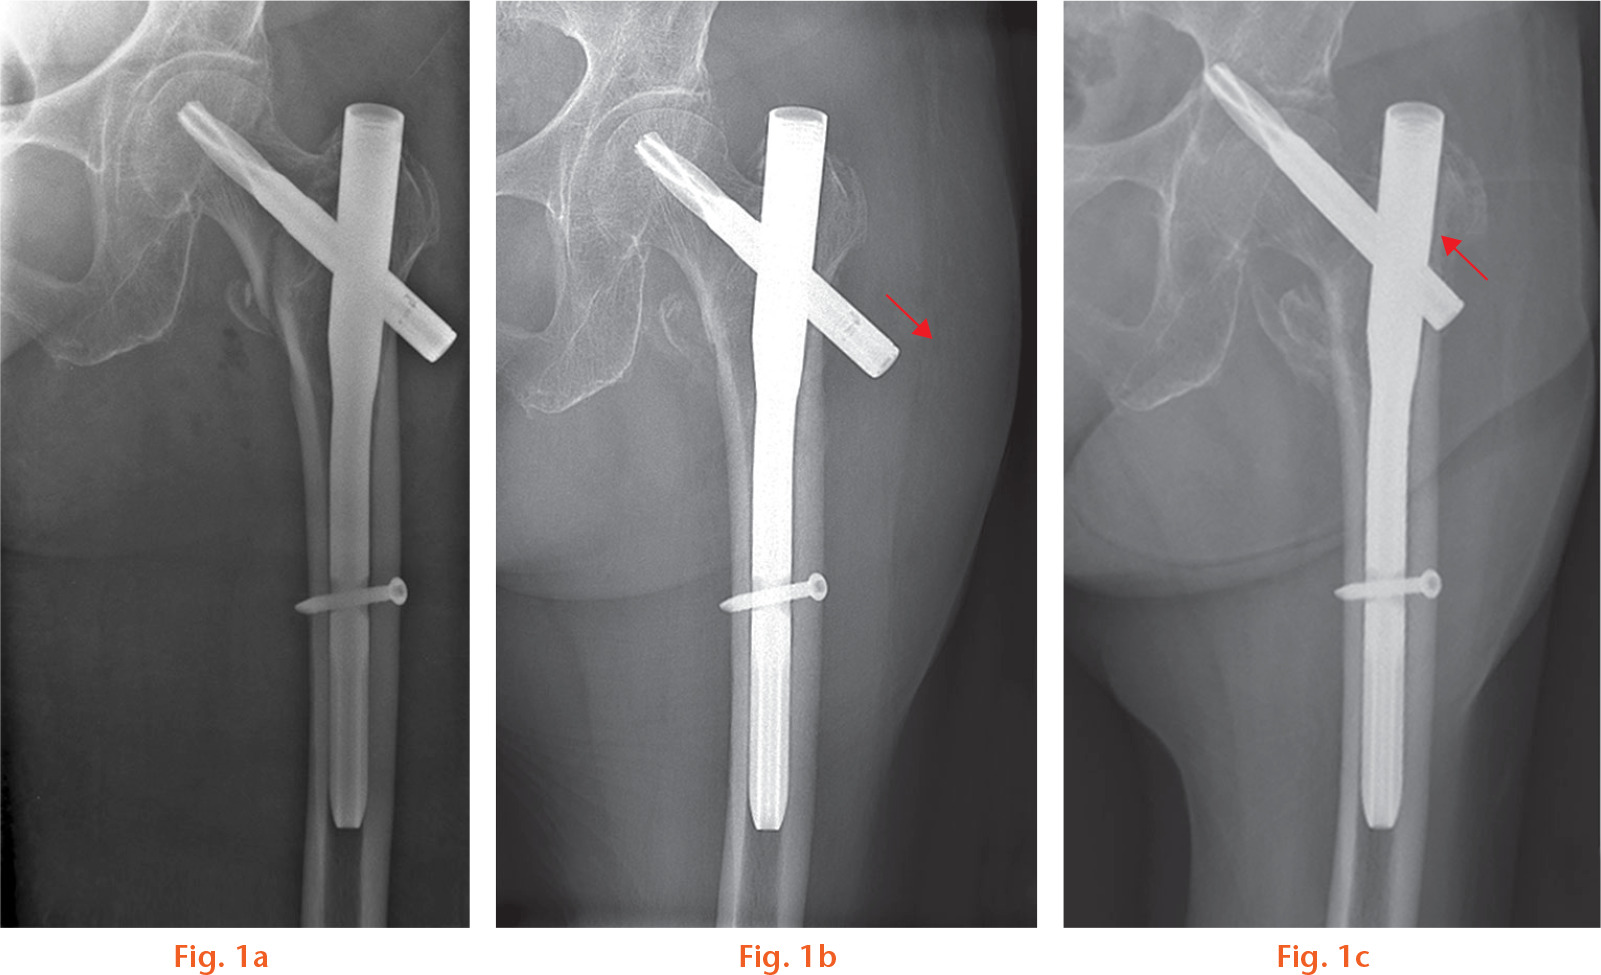 Fig. 1 
          Plain radiographs following fixation of the pertrochanteric left femur fracture with a cephalomedullary device (Proximal Femur Antirotation Nail (PFNA; Synthes, Oberdorf, Switzerland)). a) Immediately postoperative; b) subsequent impaction of the fracture with gradual lateral migration of the femoral neck element with respect to the intramedullary nail component (arrow); c) medial migration of the Femoral Neck Element (FNE) with respect to the intramedullary nail component with perforation of the femoral head and penetration of the acetabulum (arrow).
        